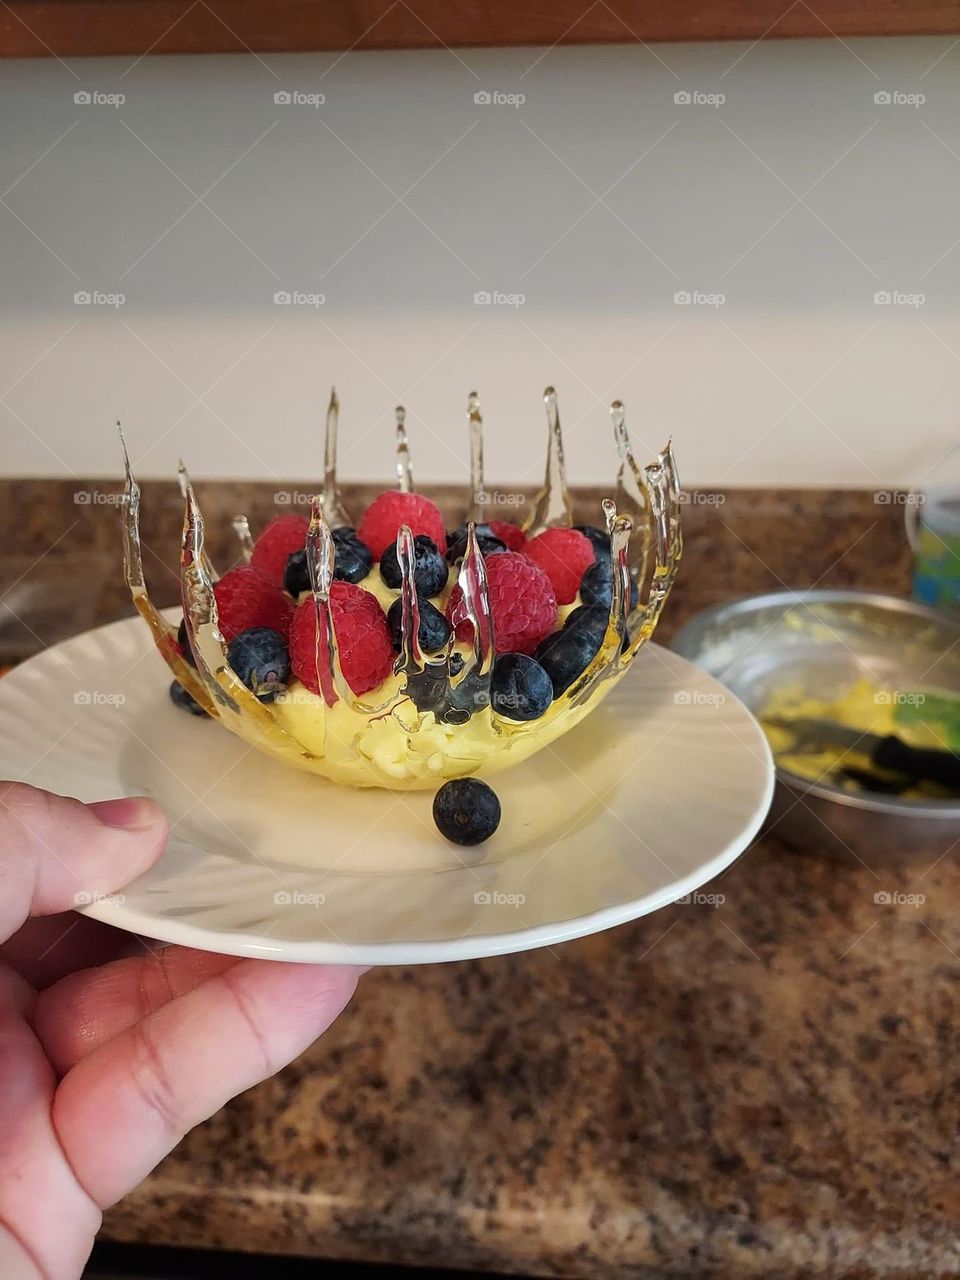 Something sweet and fresh made from the heart! I made a sugar bowl and inside is lemon cheesecake mousse topped with fresh blueberries and raspberries.